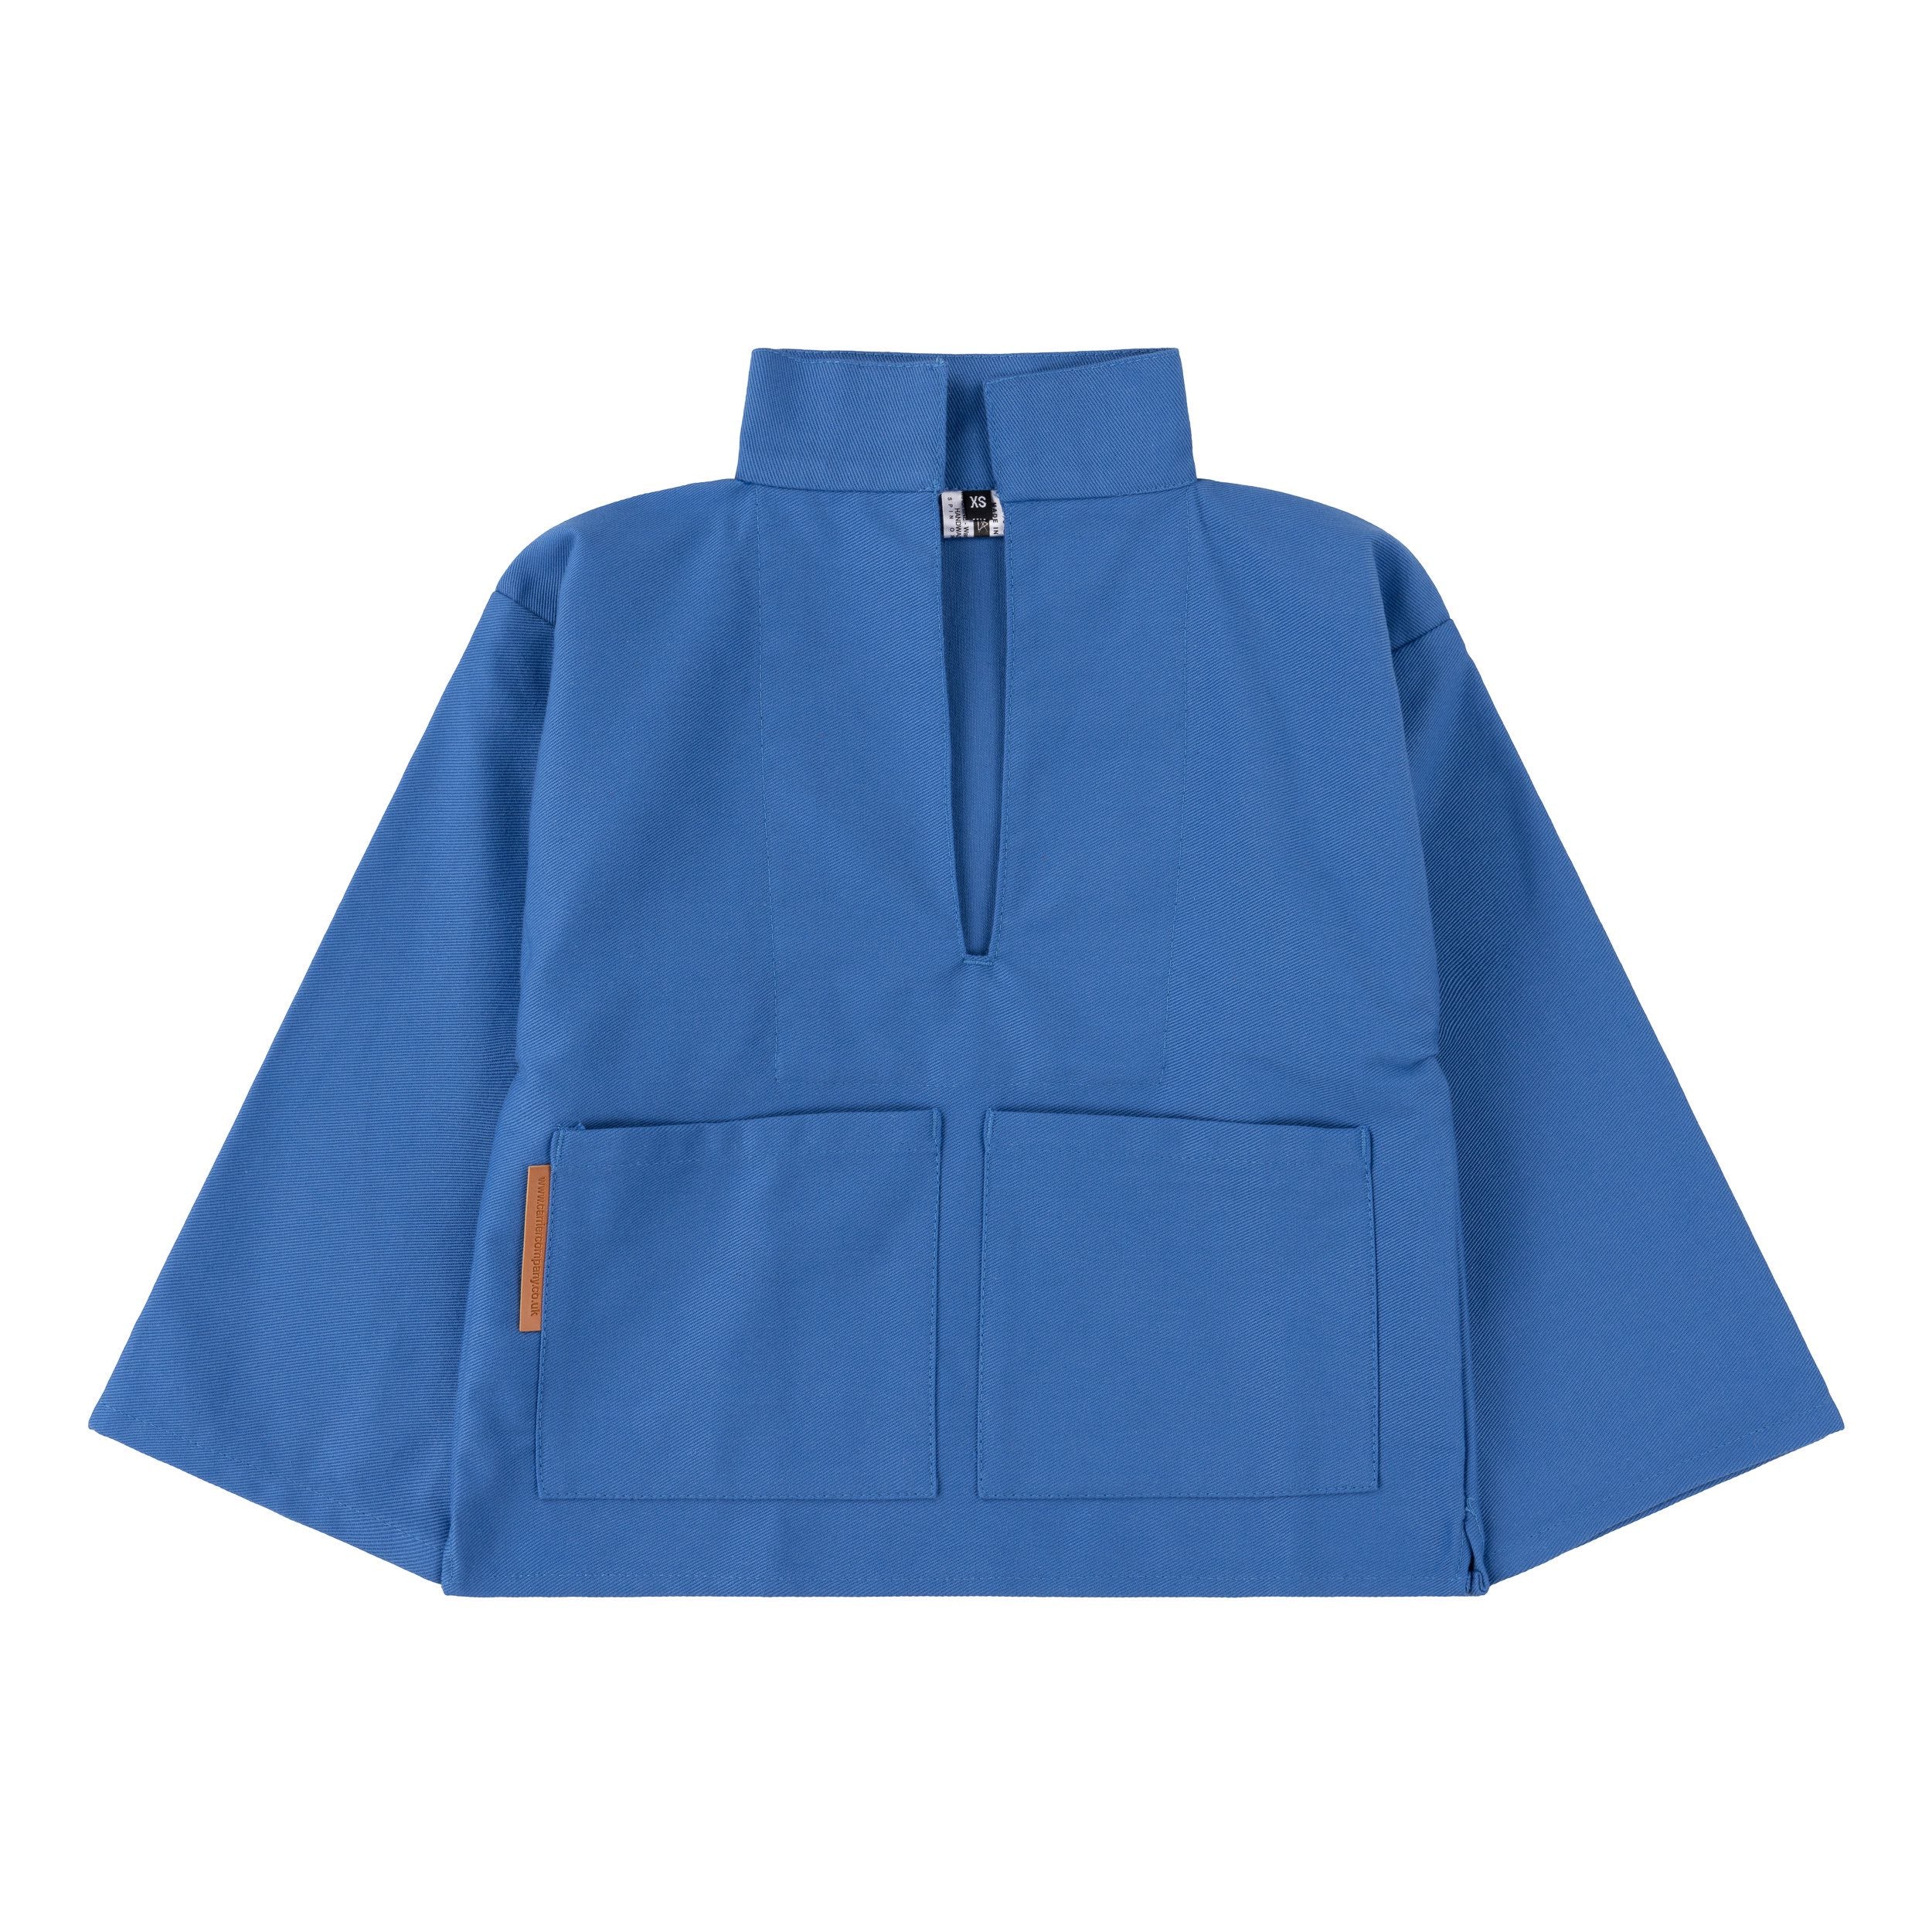 Carrier Company Child's Traditional Smock